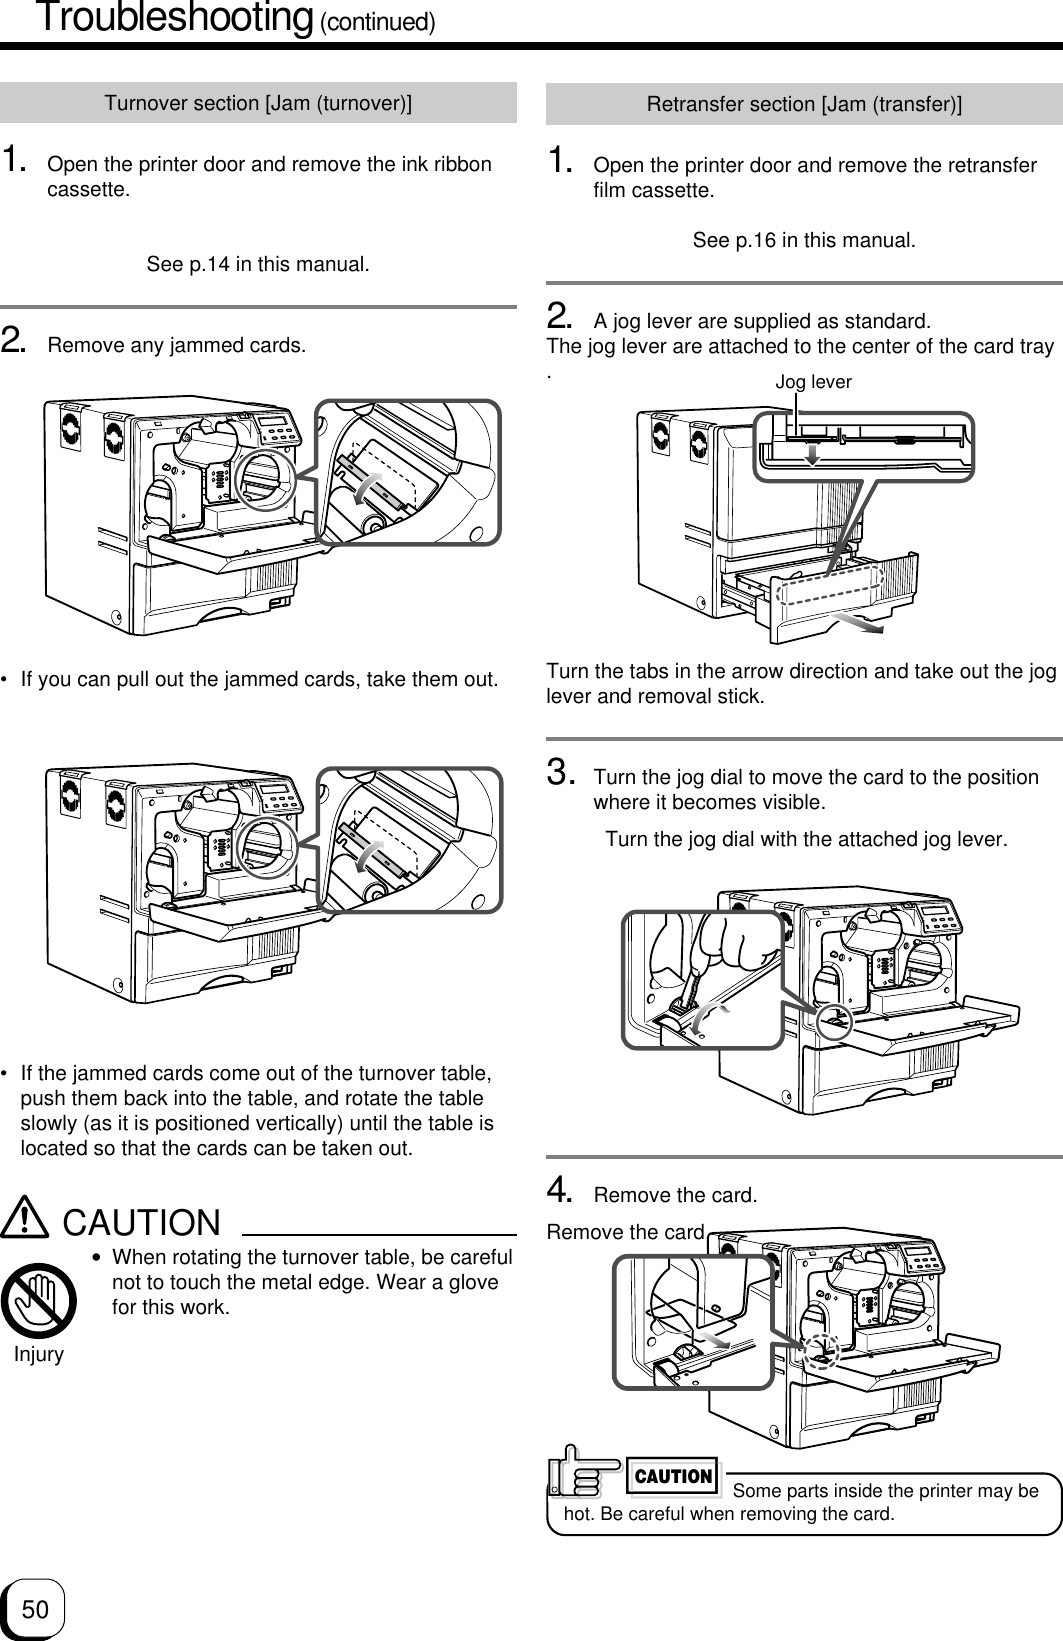 50Turnover section [Jam (turnover)]1. Open the printer door and remove the ink ribboncassette.See p.14 in this manual.2. Remove any jammed cards.Retransfer section [Jam (transfer)]1. Open the printer door and remove the retransferfilm cassette.See p.16 in this manual.2. A jog lever are supplied as standard.The jog lever are attached to the center of the card tray.Turn the tabs in the arrow direction and take out the joglever and removal stick.3. Turn the jog dial to move the card to the positionwhere it becomes visible.Turn the jog dial with the attached jog lever.4. Remove the card.Remove the card. Some parts inside the printer may behot. Be careful when removing the card.CAUTION• If the jammed cards come out of the turnover table,push them back into the table, and rotate the tableslowly (as it is positioned vertically) until the table islocated so that the cards can be taken out.CAUTION•When rotating the turnover table, be carefulnot to touch the metal edge. Wear a glovefor this work.Injury• If you can pull out the jammed cards, take them out.Jog leverTroubleshooting (continued)